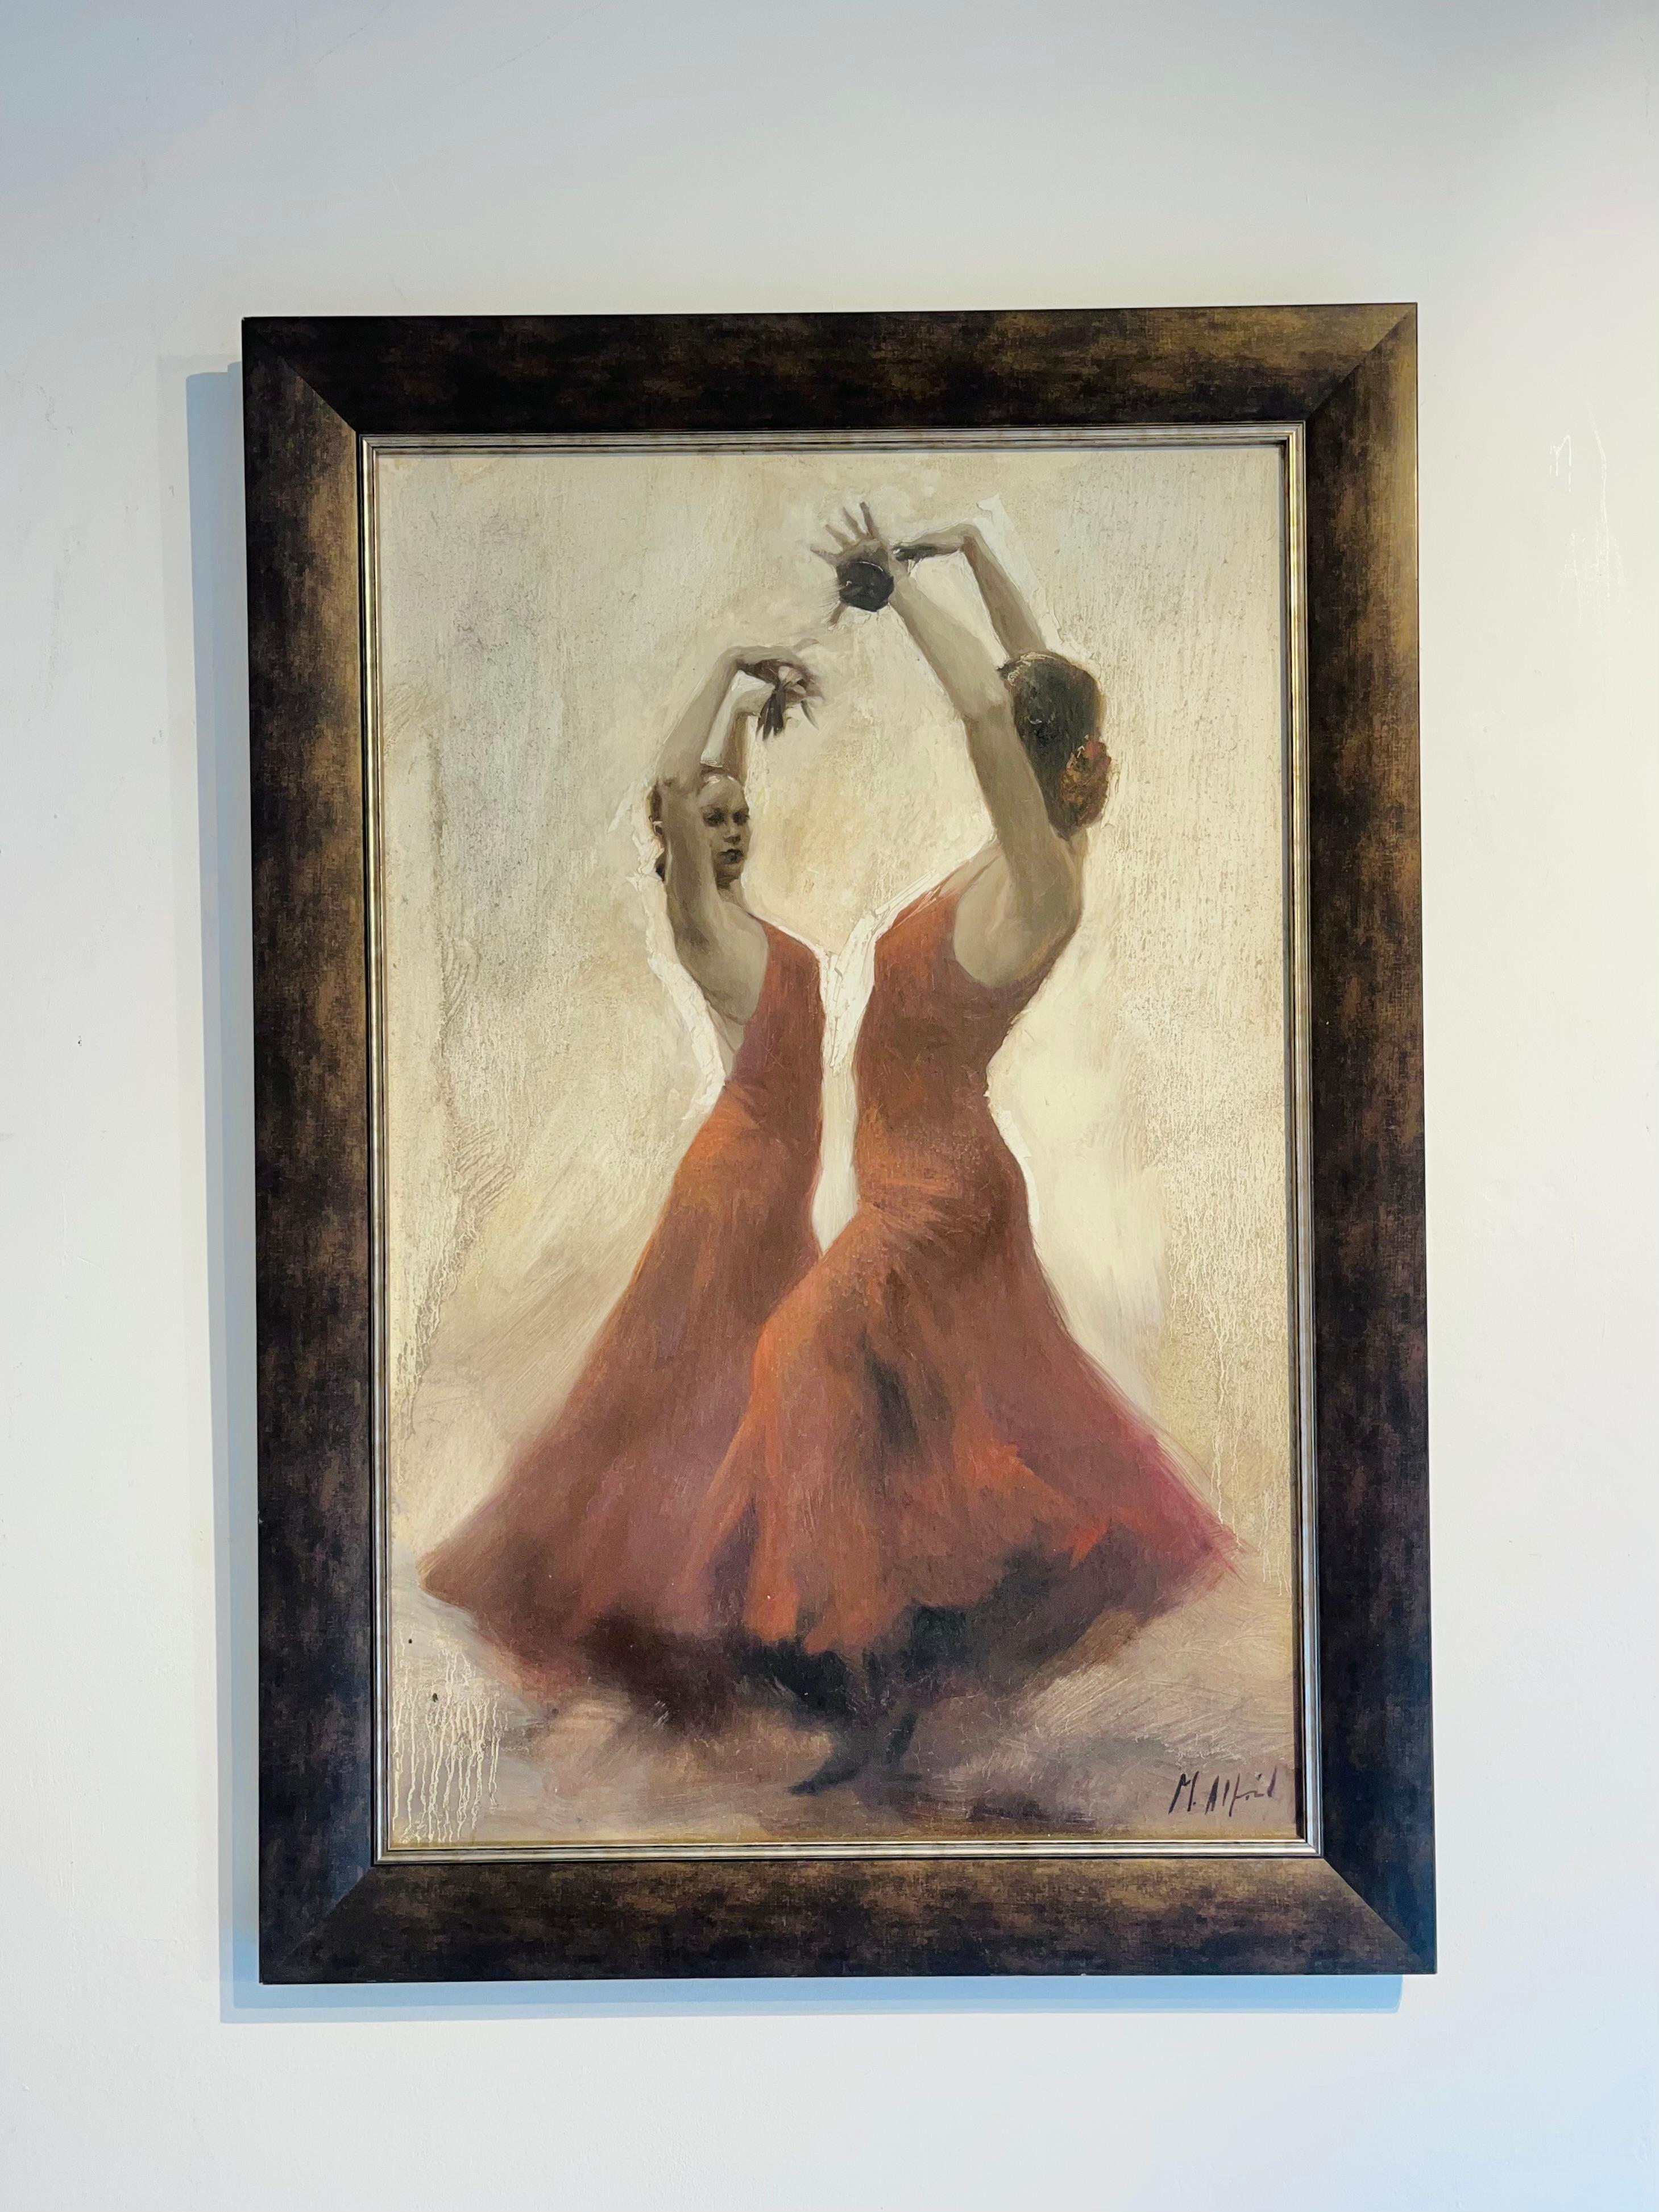 Flamenco 2-original impressionism figurative female painting-contemporary Art - Painting by Michael Alford